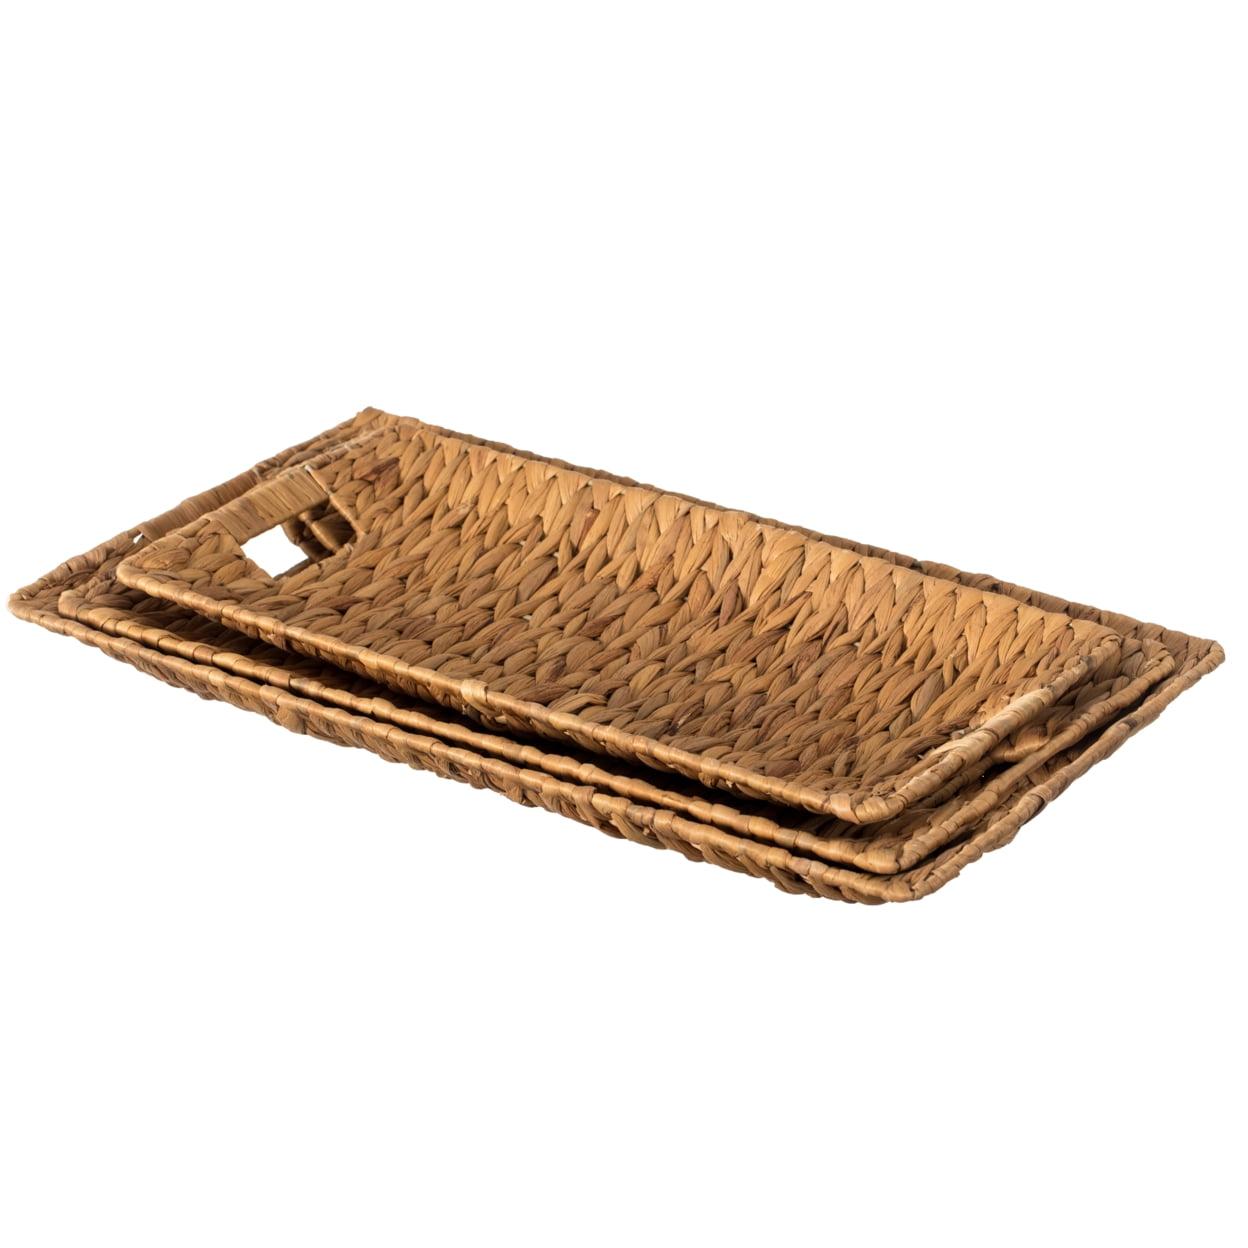 Large Hand-Woven Water Hyacinth Rectangular Serving Tray with Handles